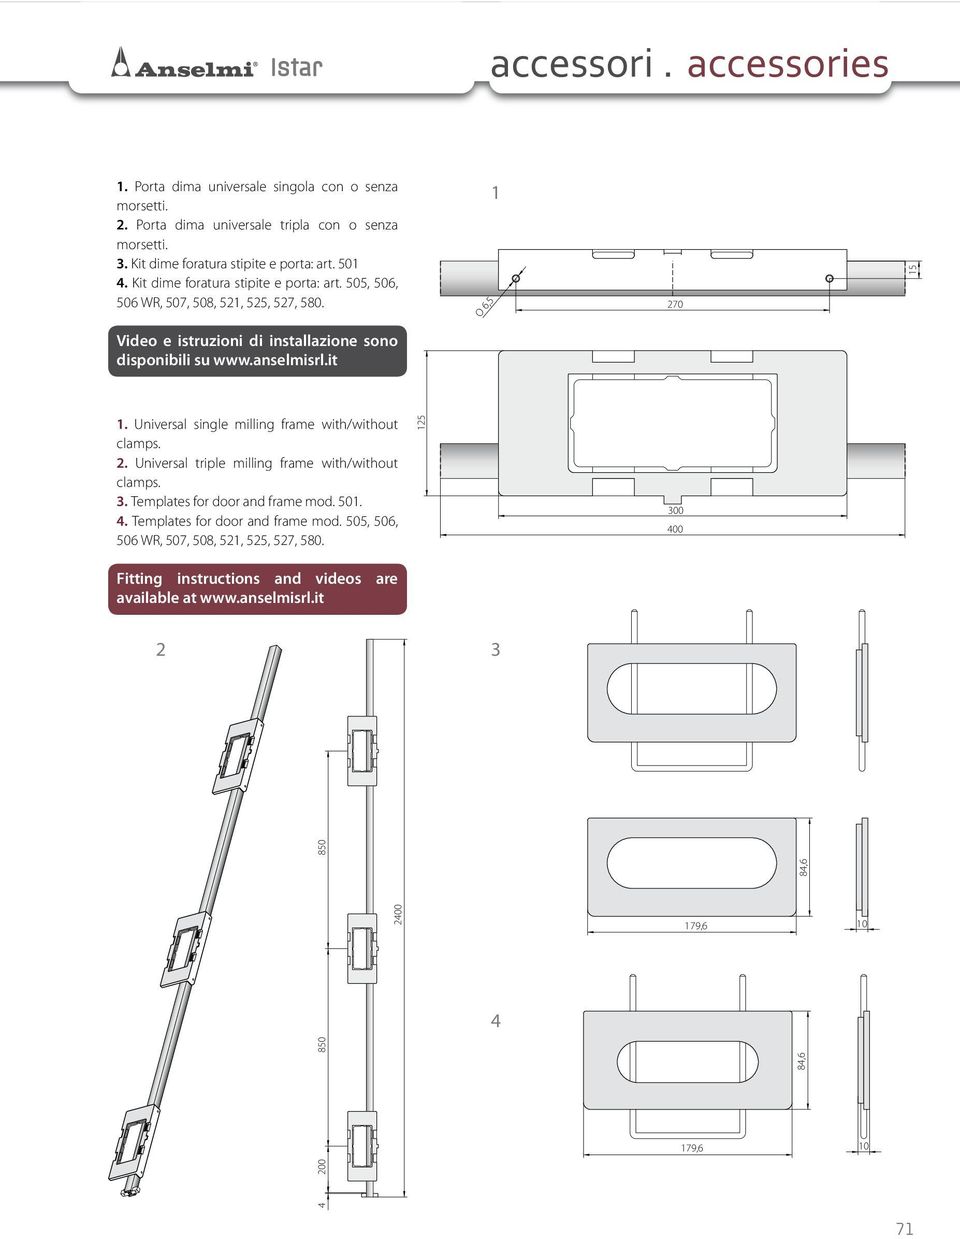 it 1. Universal single milling frame with/without clamps. 2. Universal triple milling frame with/without clamps. 3. Templates for door and frame mod. 501. 4.